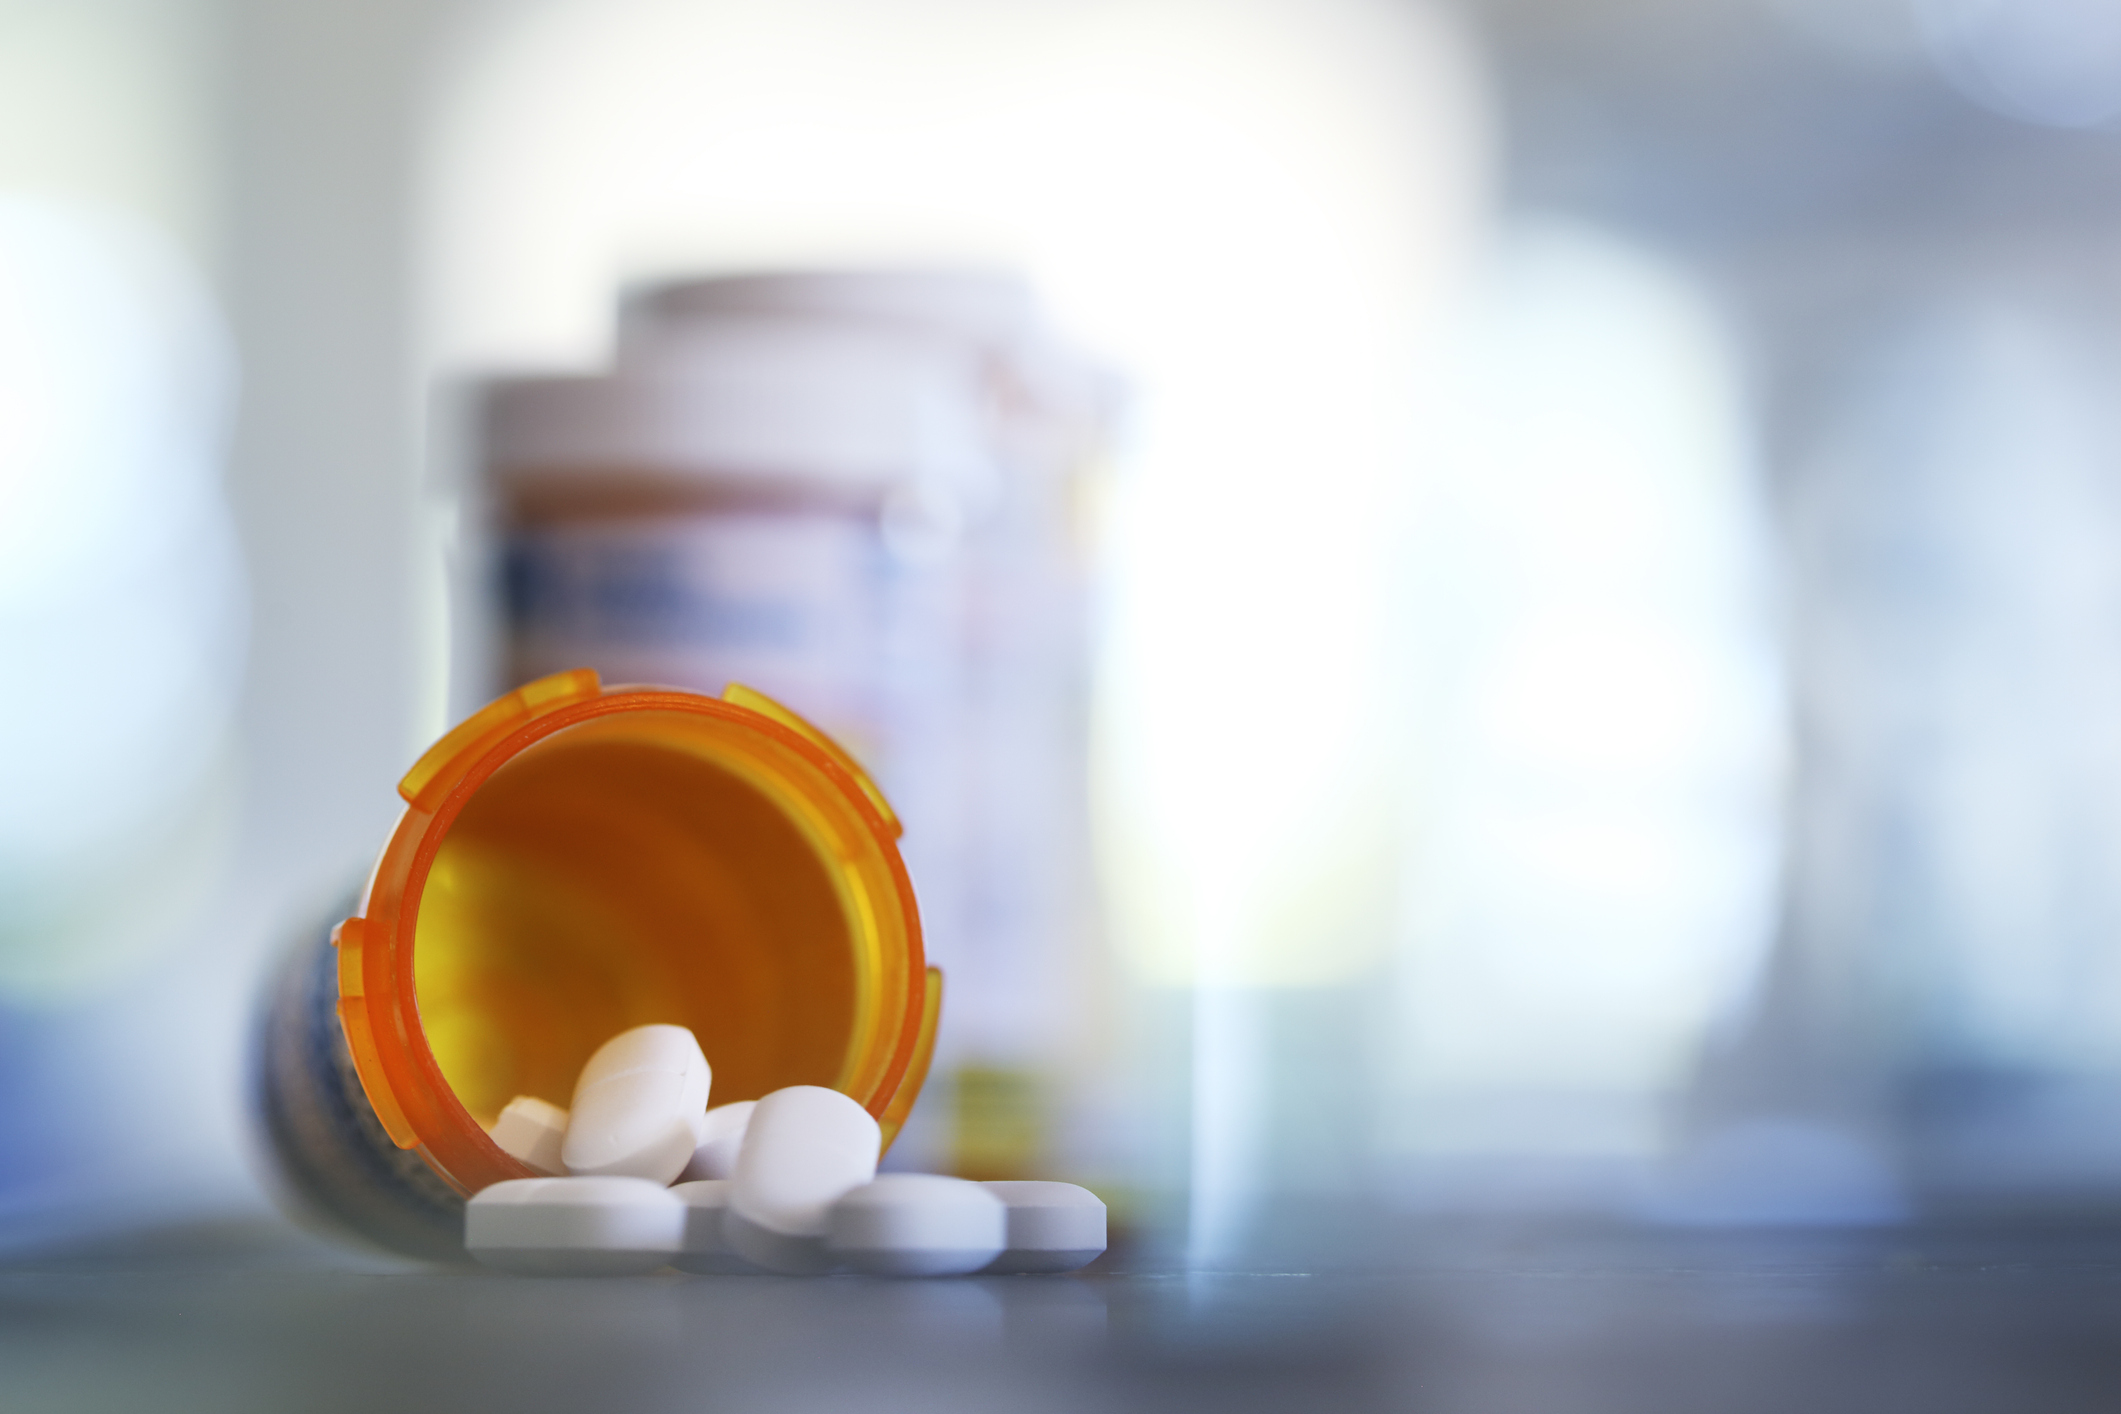 Pills pour out of a prescription medication bottle onto a kitchen counter.  Several other pill bottles stand out of focus in the background. (Pills pour out of a prescription medication bottle onto a kitchen counter.  Several other pill bottles stand